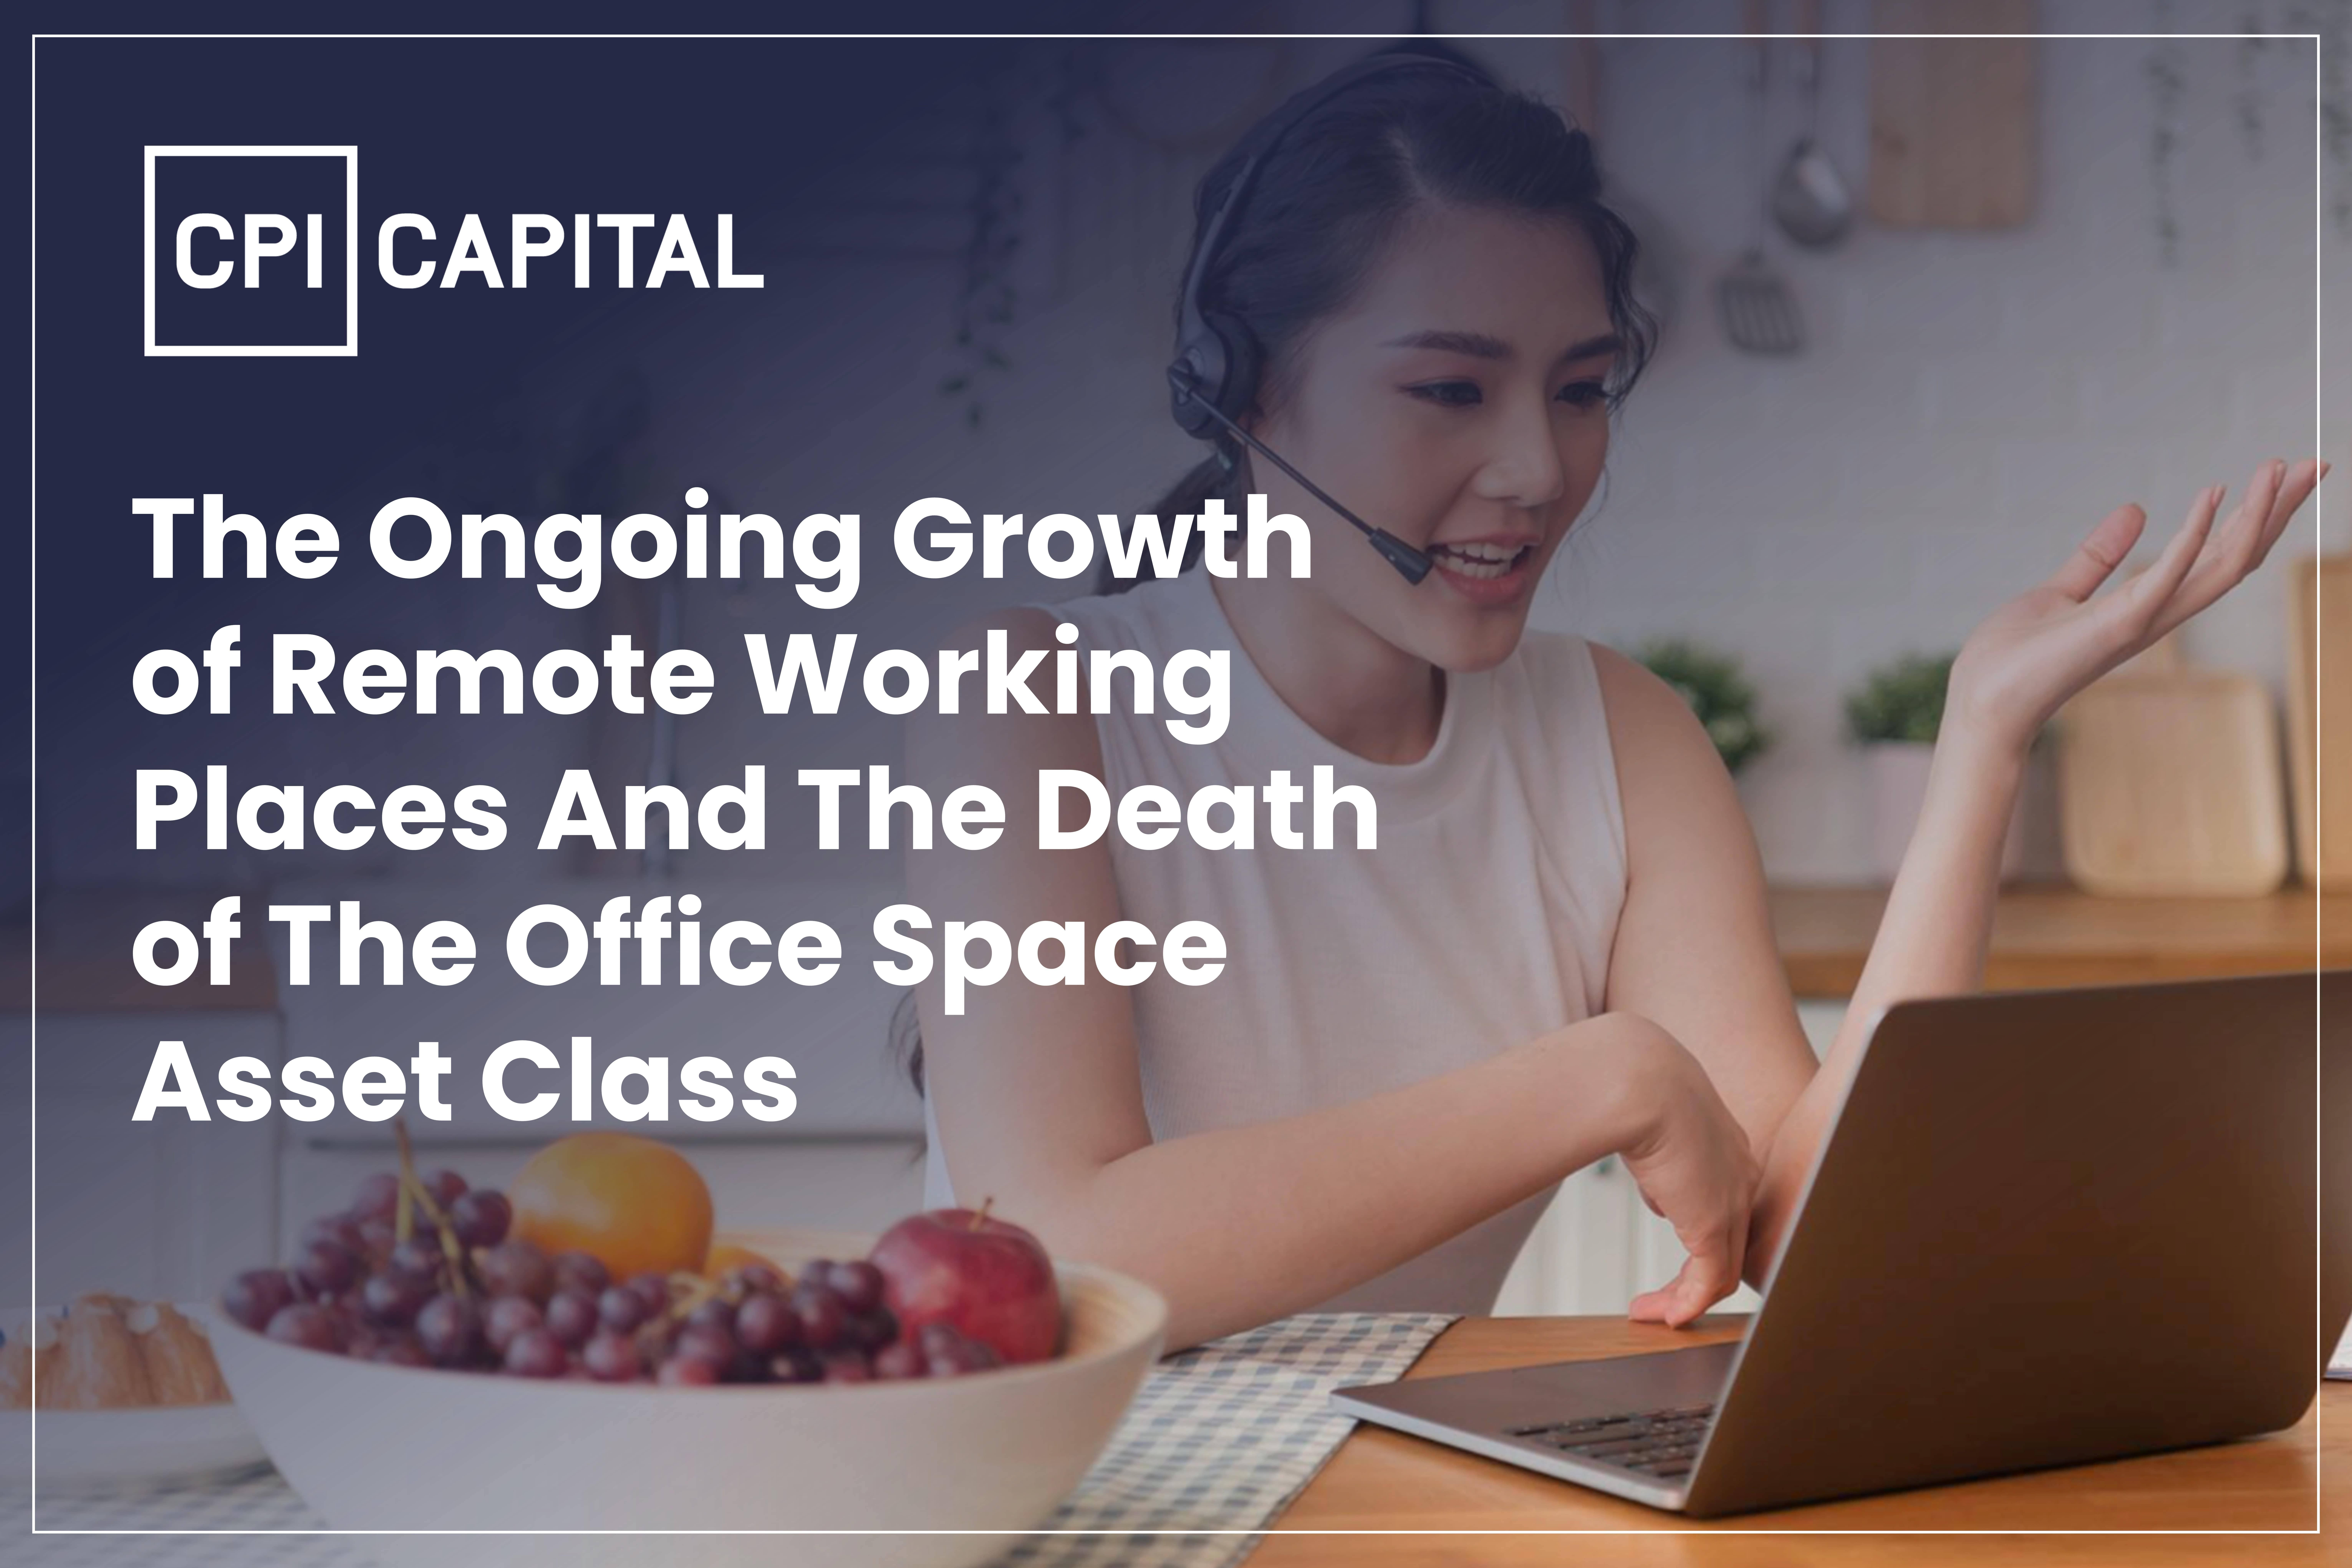 The Ongoing Growth Of Remote Working Places And The Death Of The Office Space Asset Class